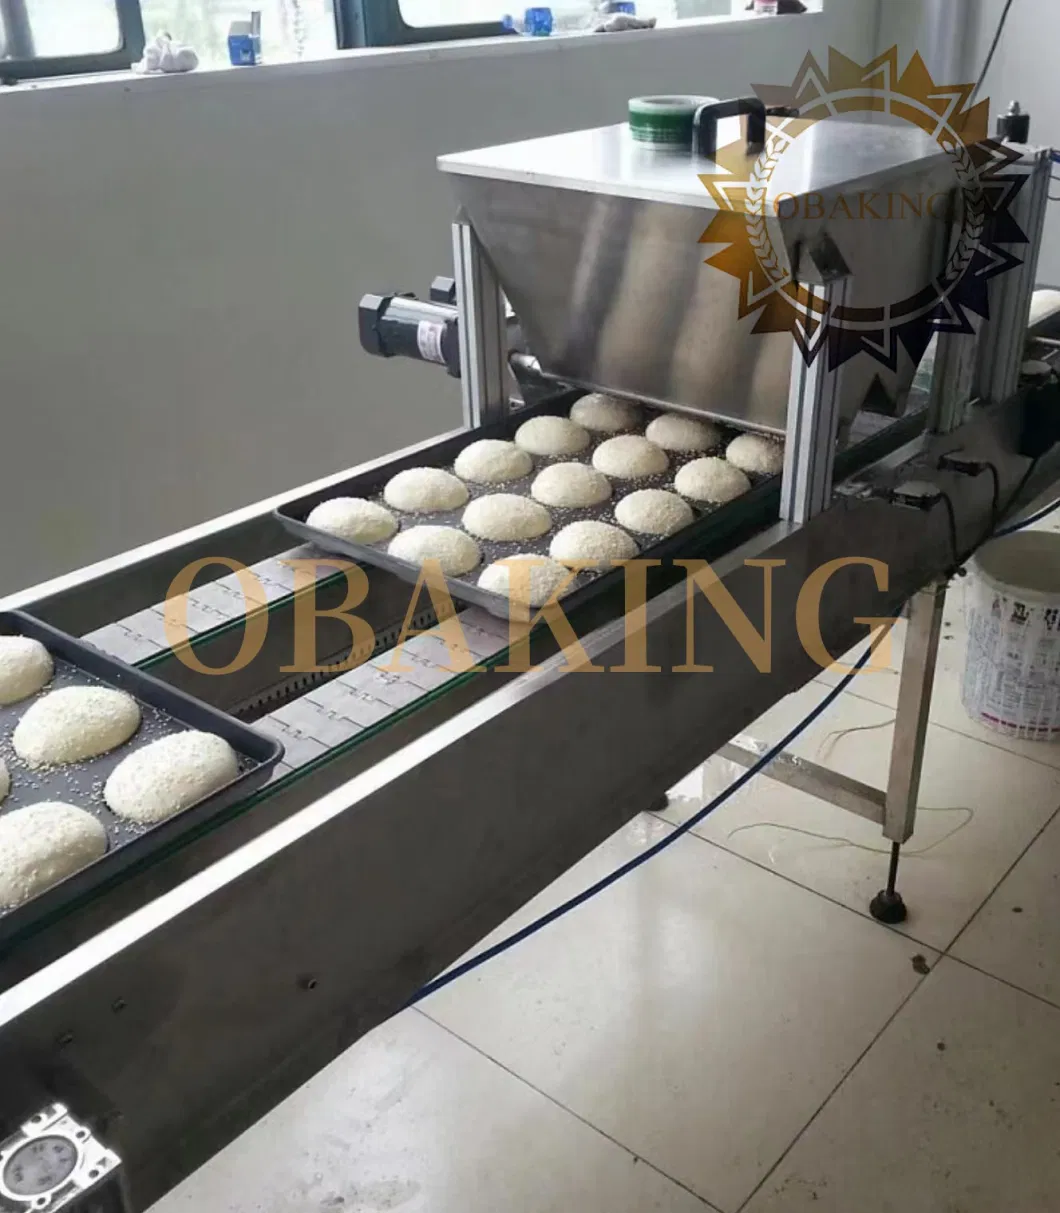 Industrial Bun Dough Divider Rounder for Bakery Factory Production Line Obaking Brand